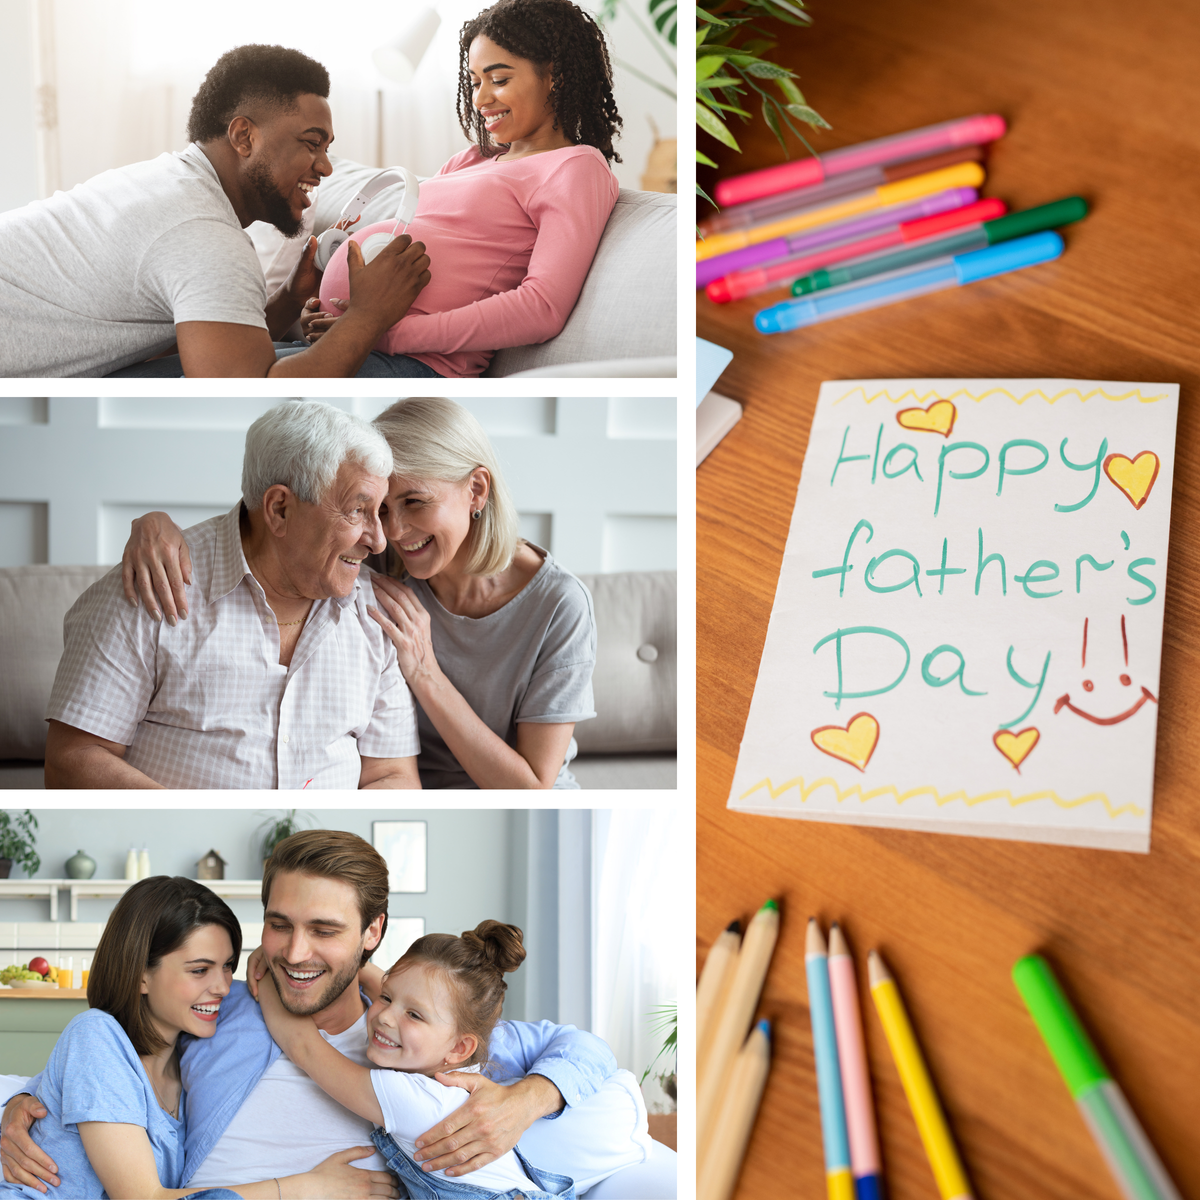 Dad with expecting mom, older wife and husband, young family embracing, handmade Father's Day card.